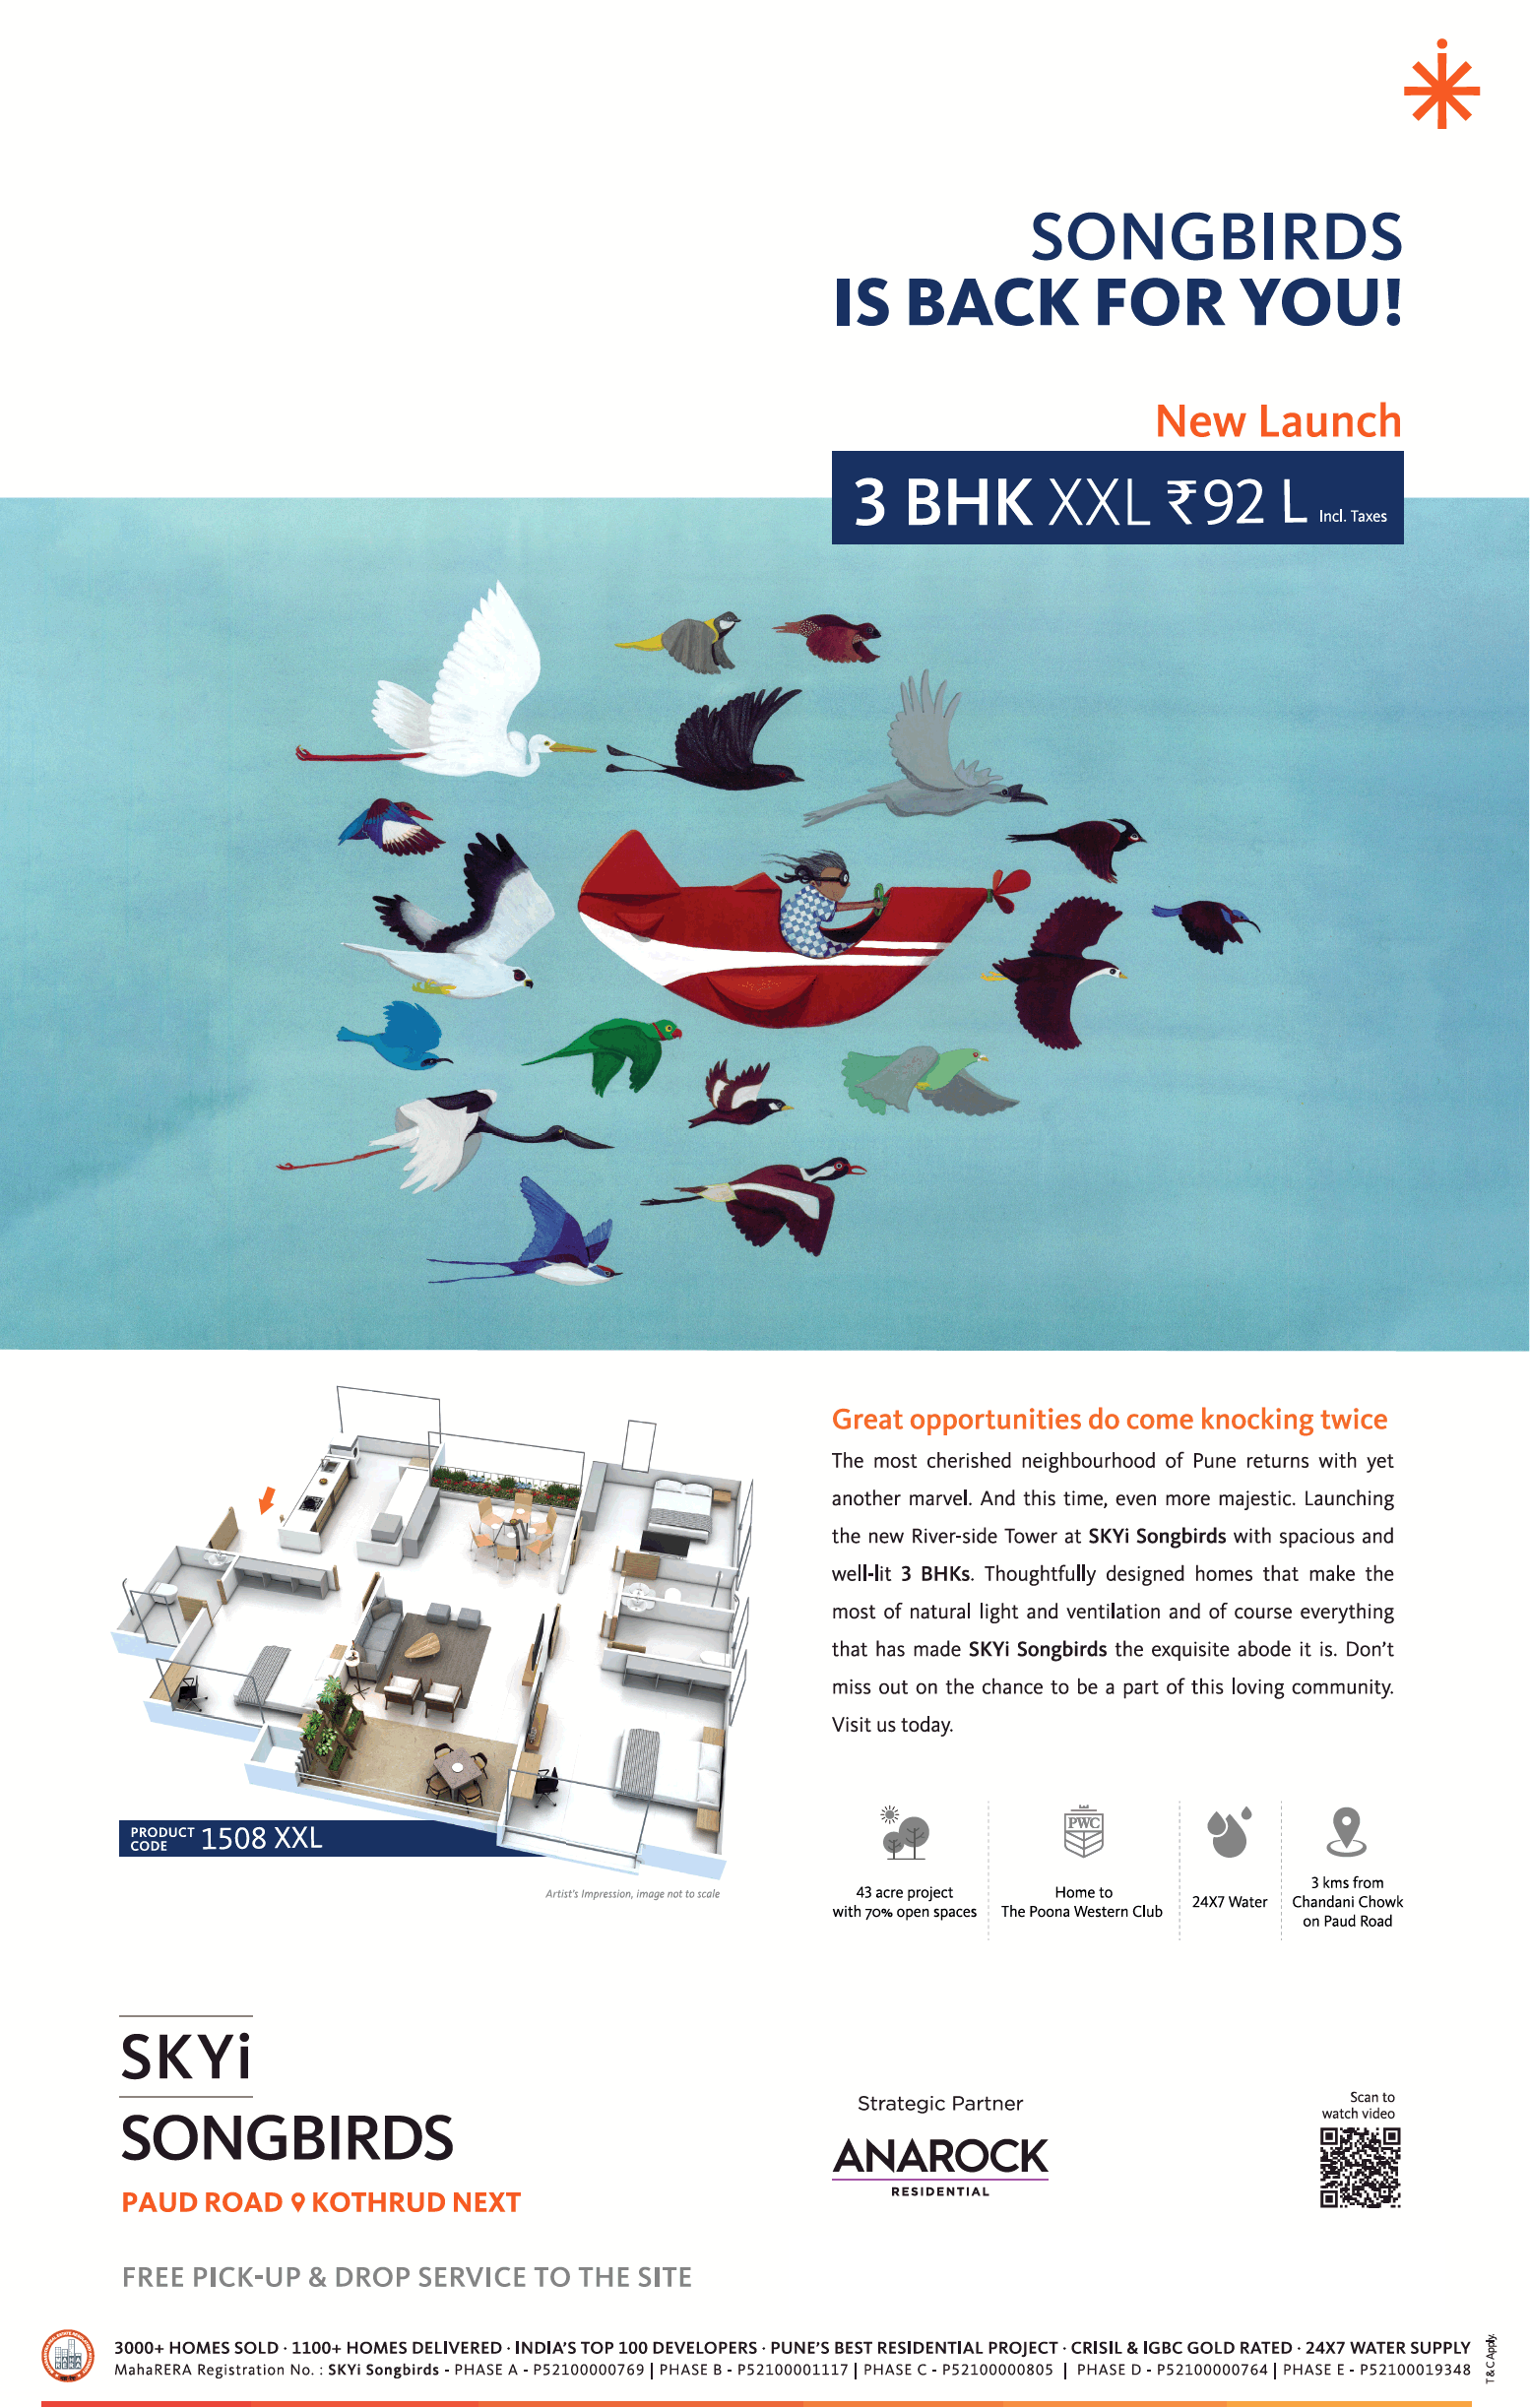 New launch 3 BHK XXL Rs 92 lakh at Skyi Songbirds in Pune Update